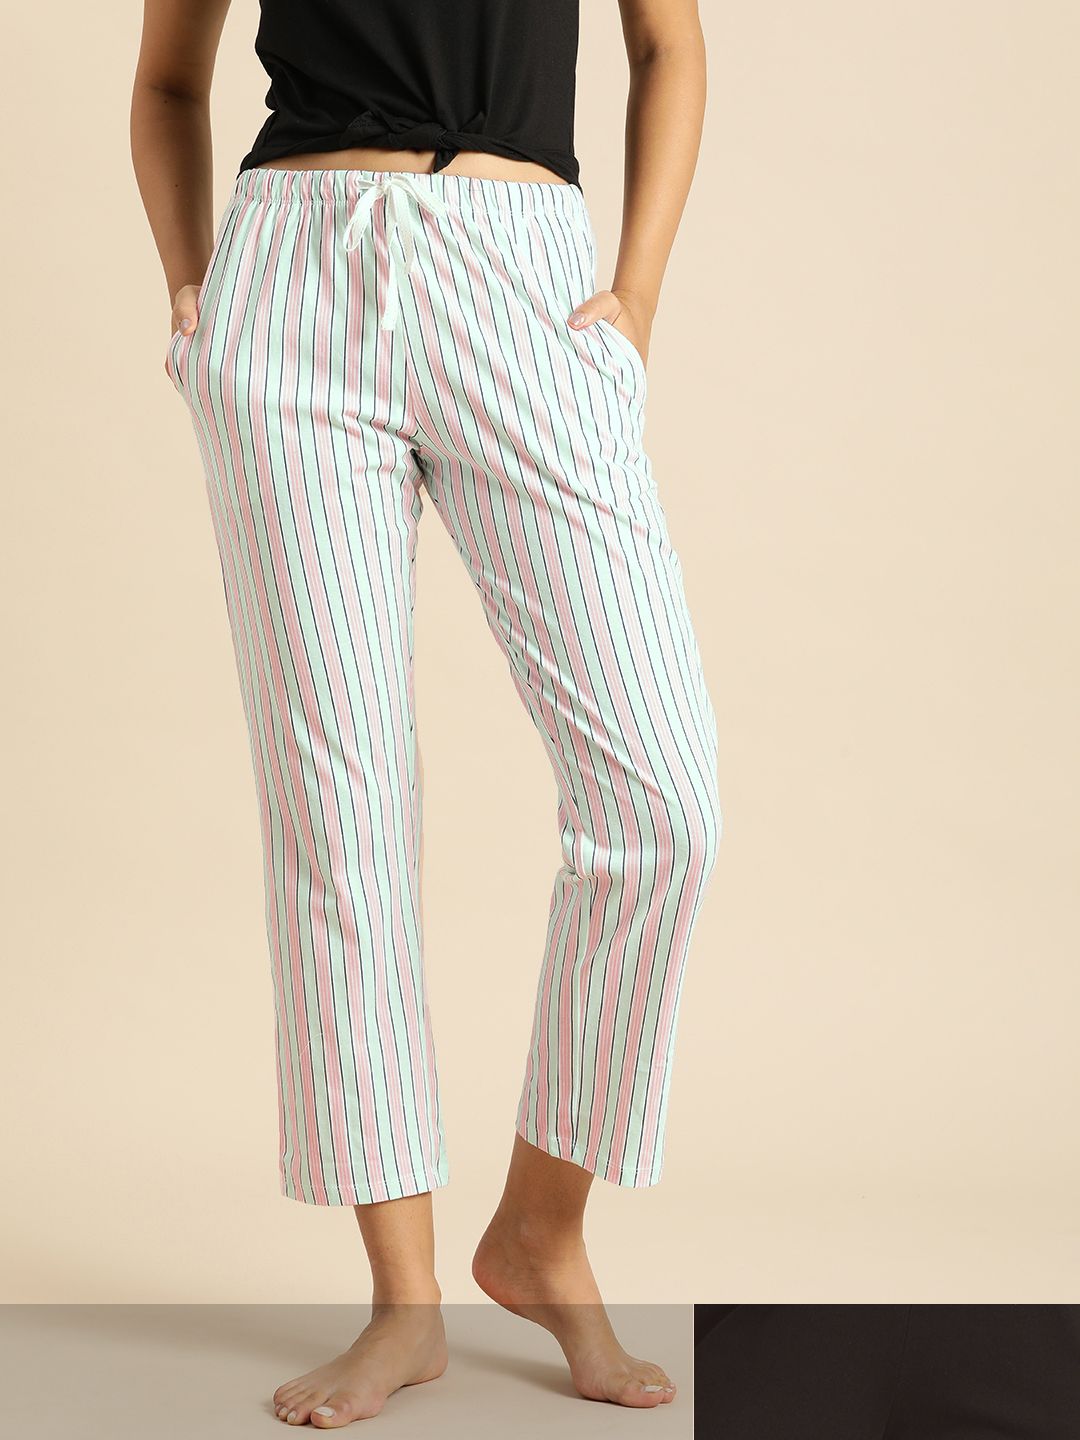 Dreamz by Pantaloons Women Pack of 2 White & Black Striped Cotton Lounge Pants Price in India